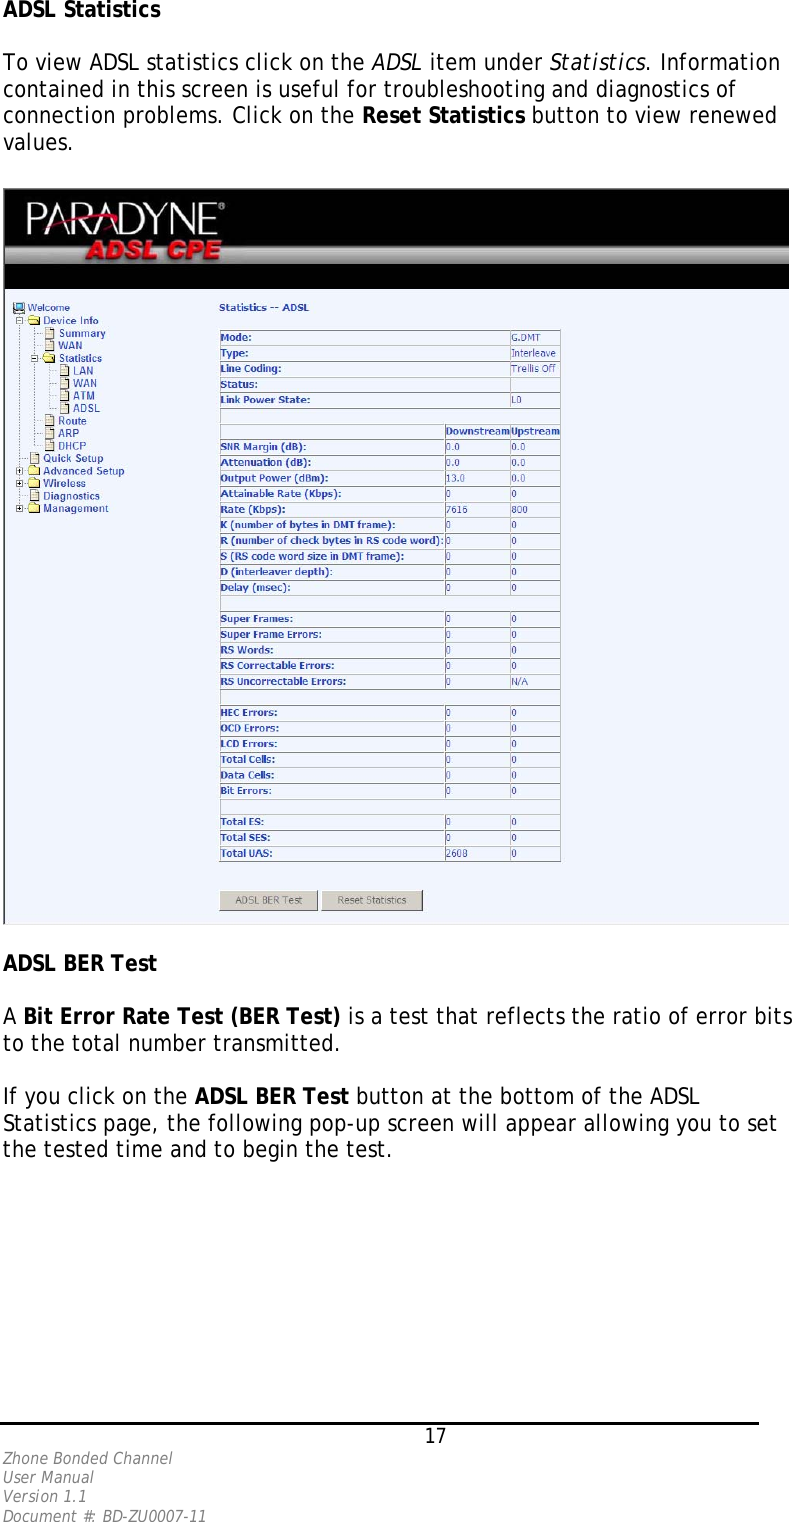 ADSL Statistics   To view ADSL statistics click on the ADSL item under Statistics. Information contained in this screen is useful for troubleshooting and diagnostics of connection problems. Click on the Reset Statistics button to view renewed values.    ADSL BER Test   A Bit Error Rate Test (BER Test) is a test that reflects the ratio of error bits to the total number transmitted.   If you click on the ADSL BER Test button at the bottom of the ADSL Statistics page, the following pop-up screen will appear allowing you to set the tested time and to begin the test.    17 Zhone Bonded Channel User Manual  Version 1.1 Document #: BD-ZU0007-11 